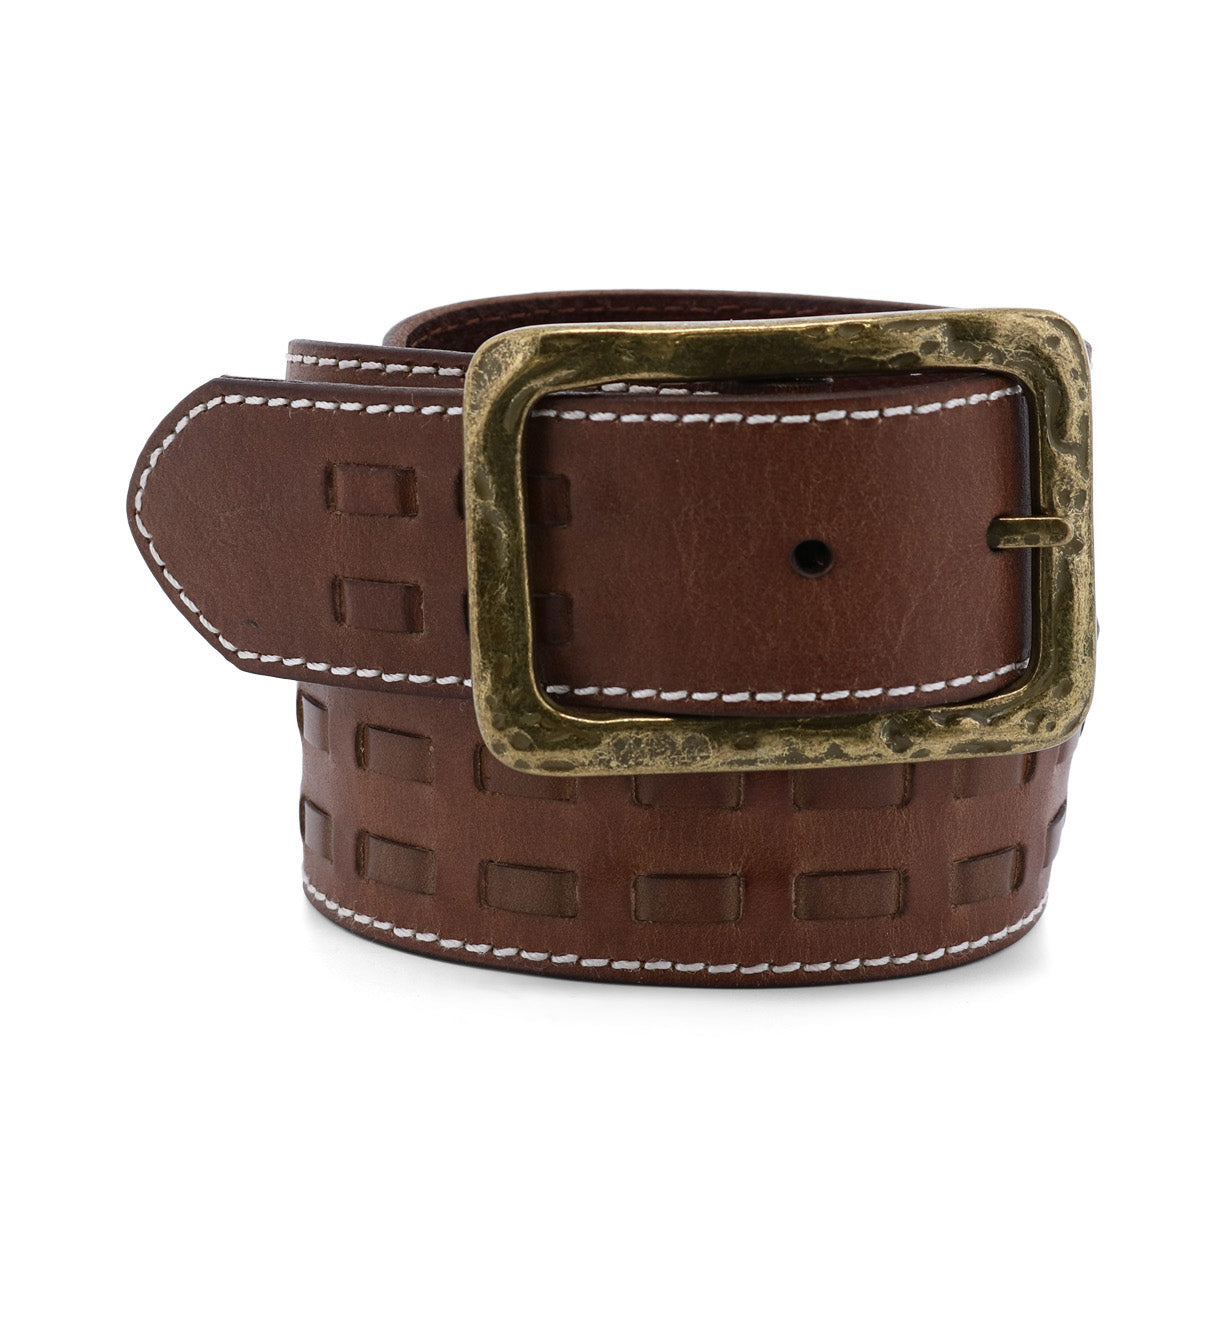 A Ross brown leather belt with a brass buckle from Bed Stu.